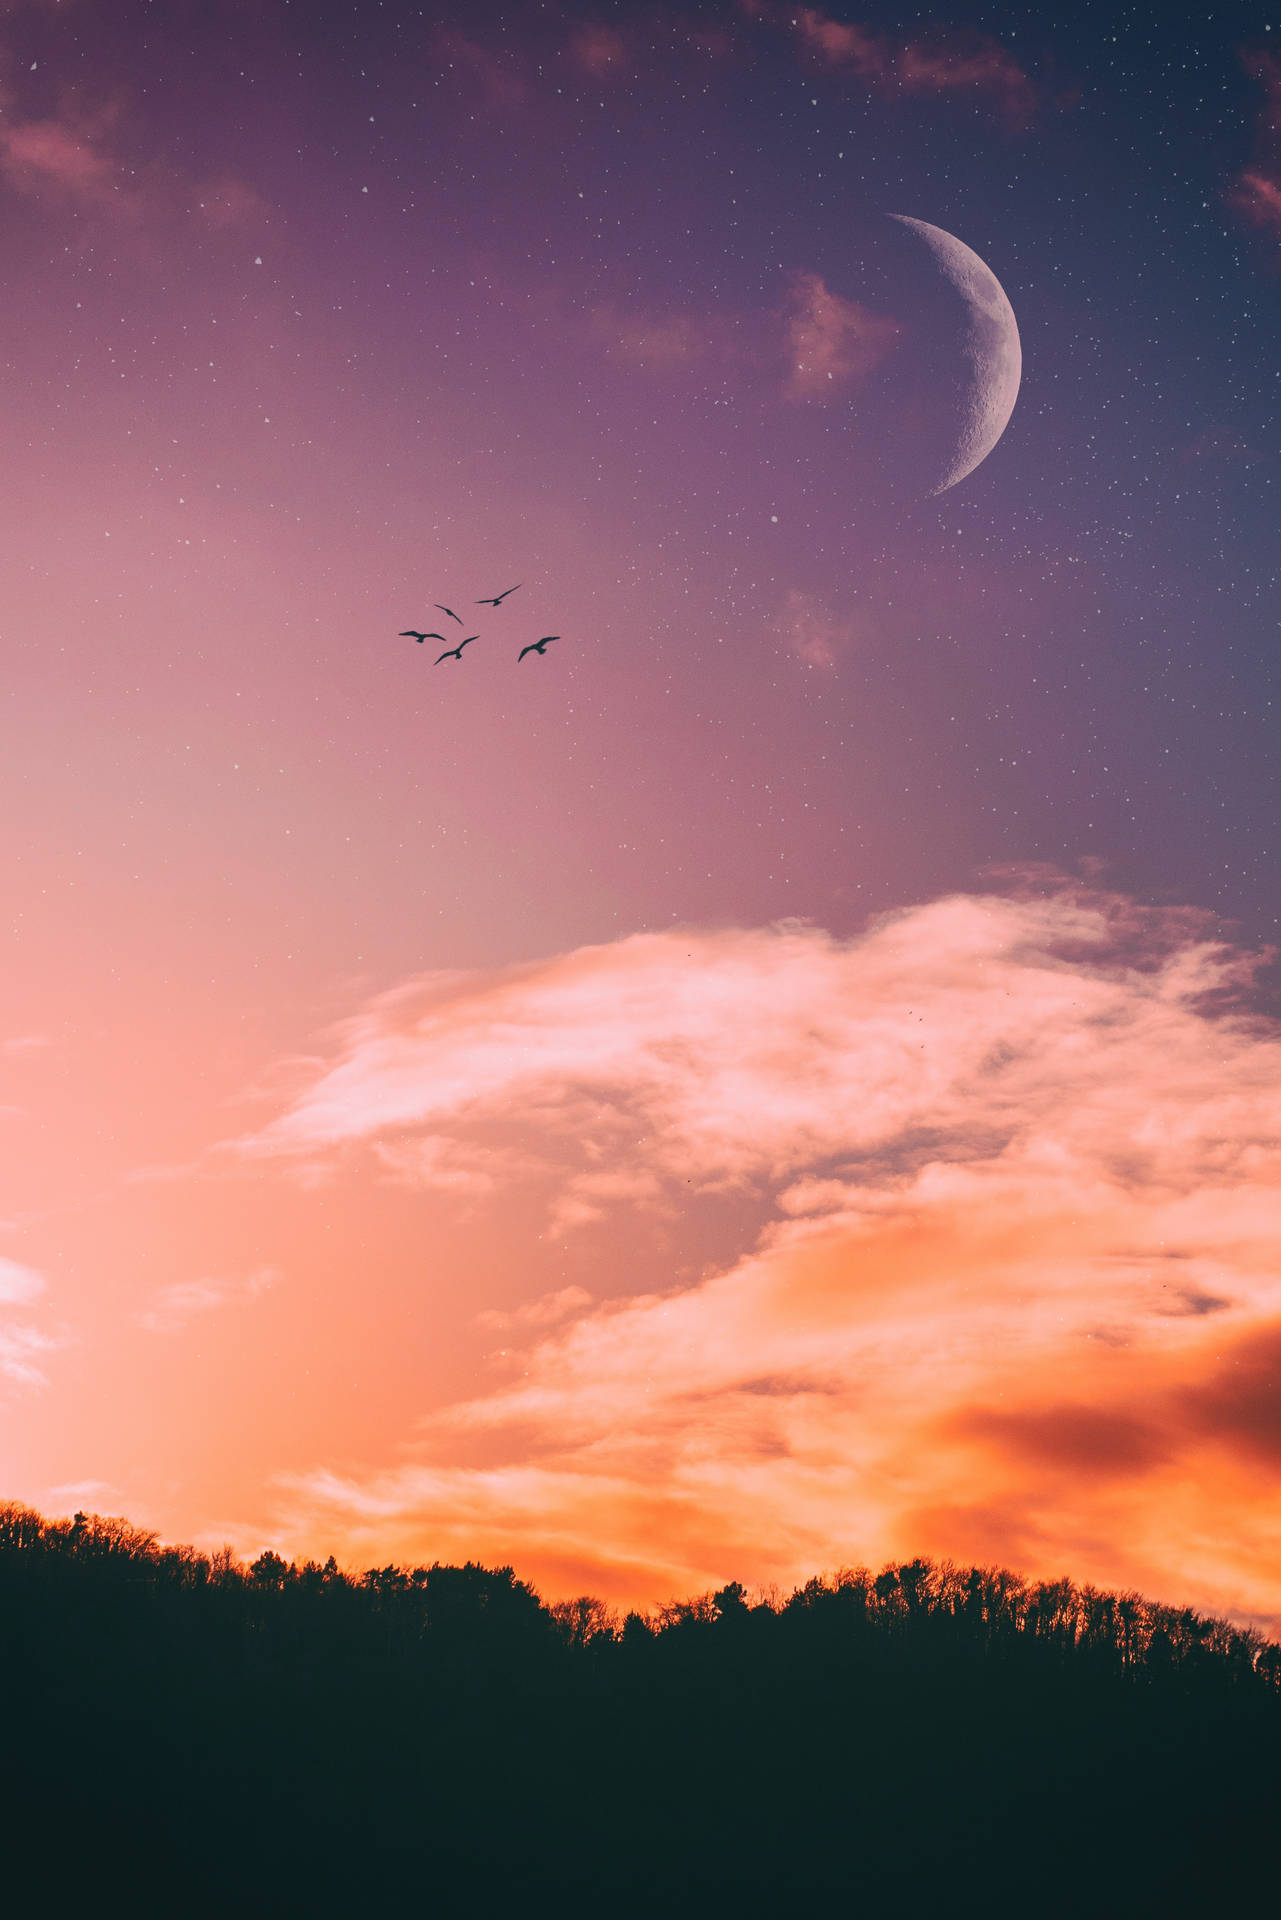 Aesthetic Sky And Crescent Moon With Birds